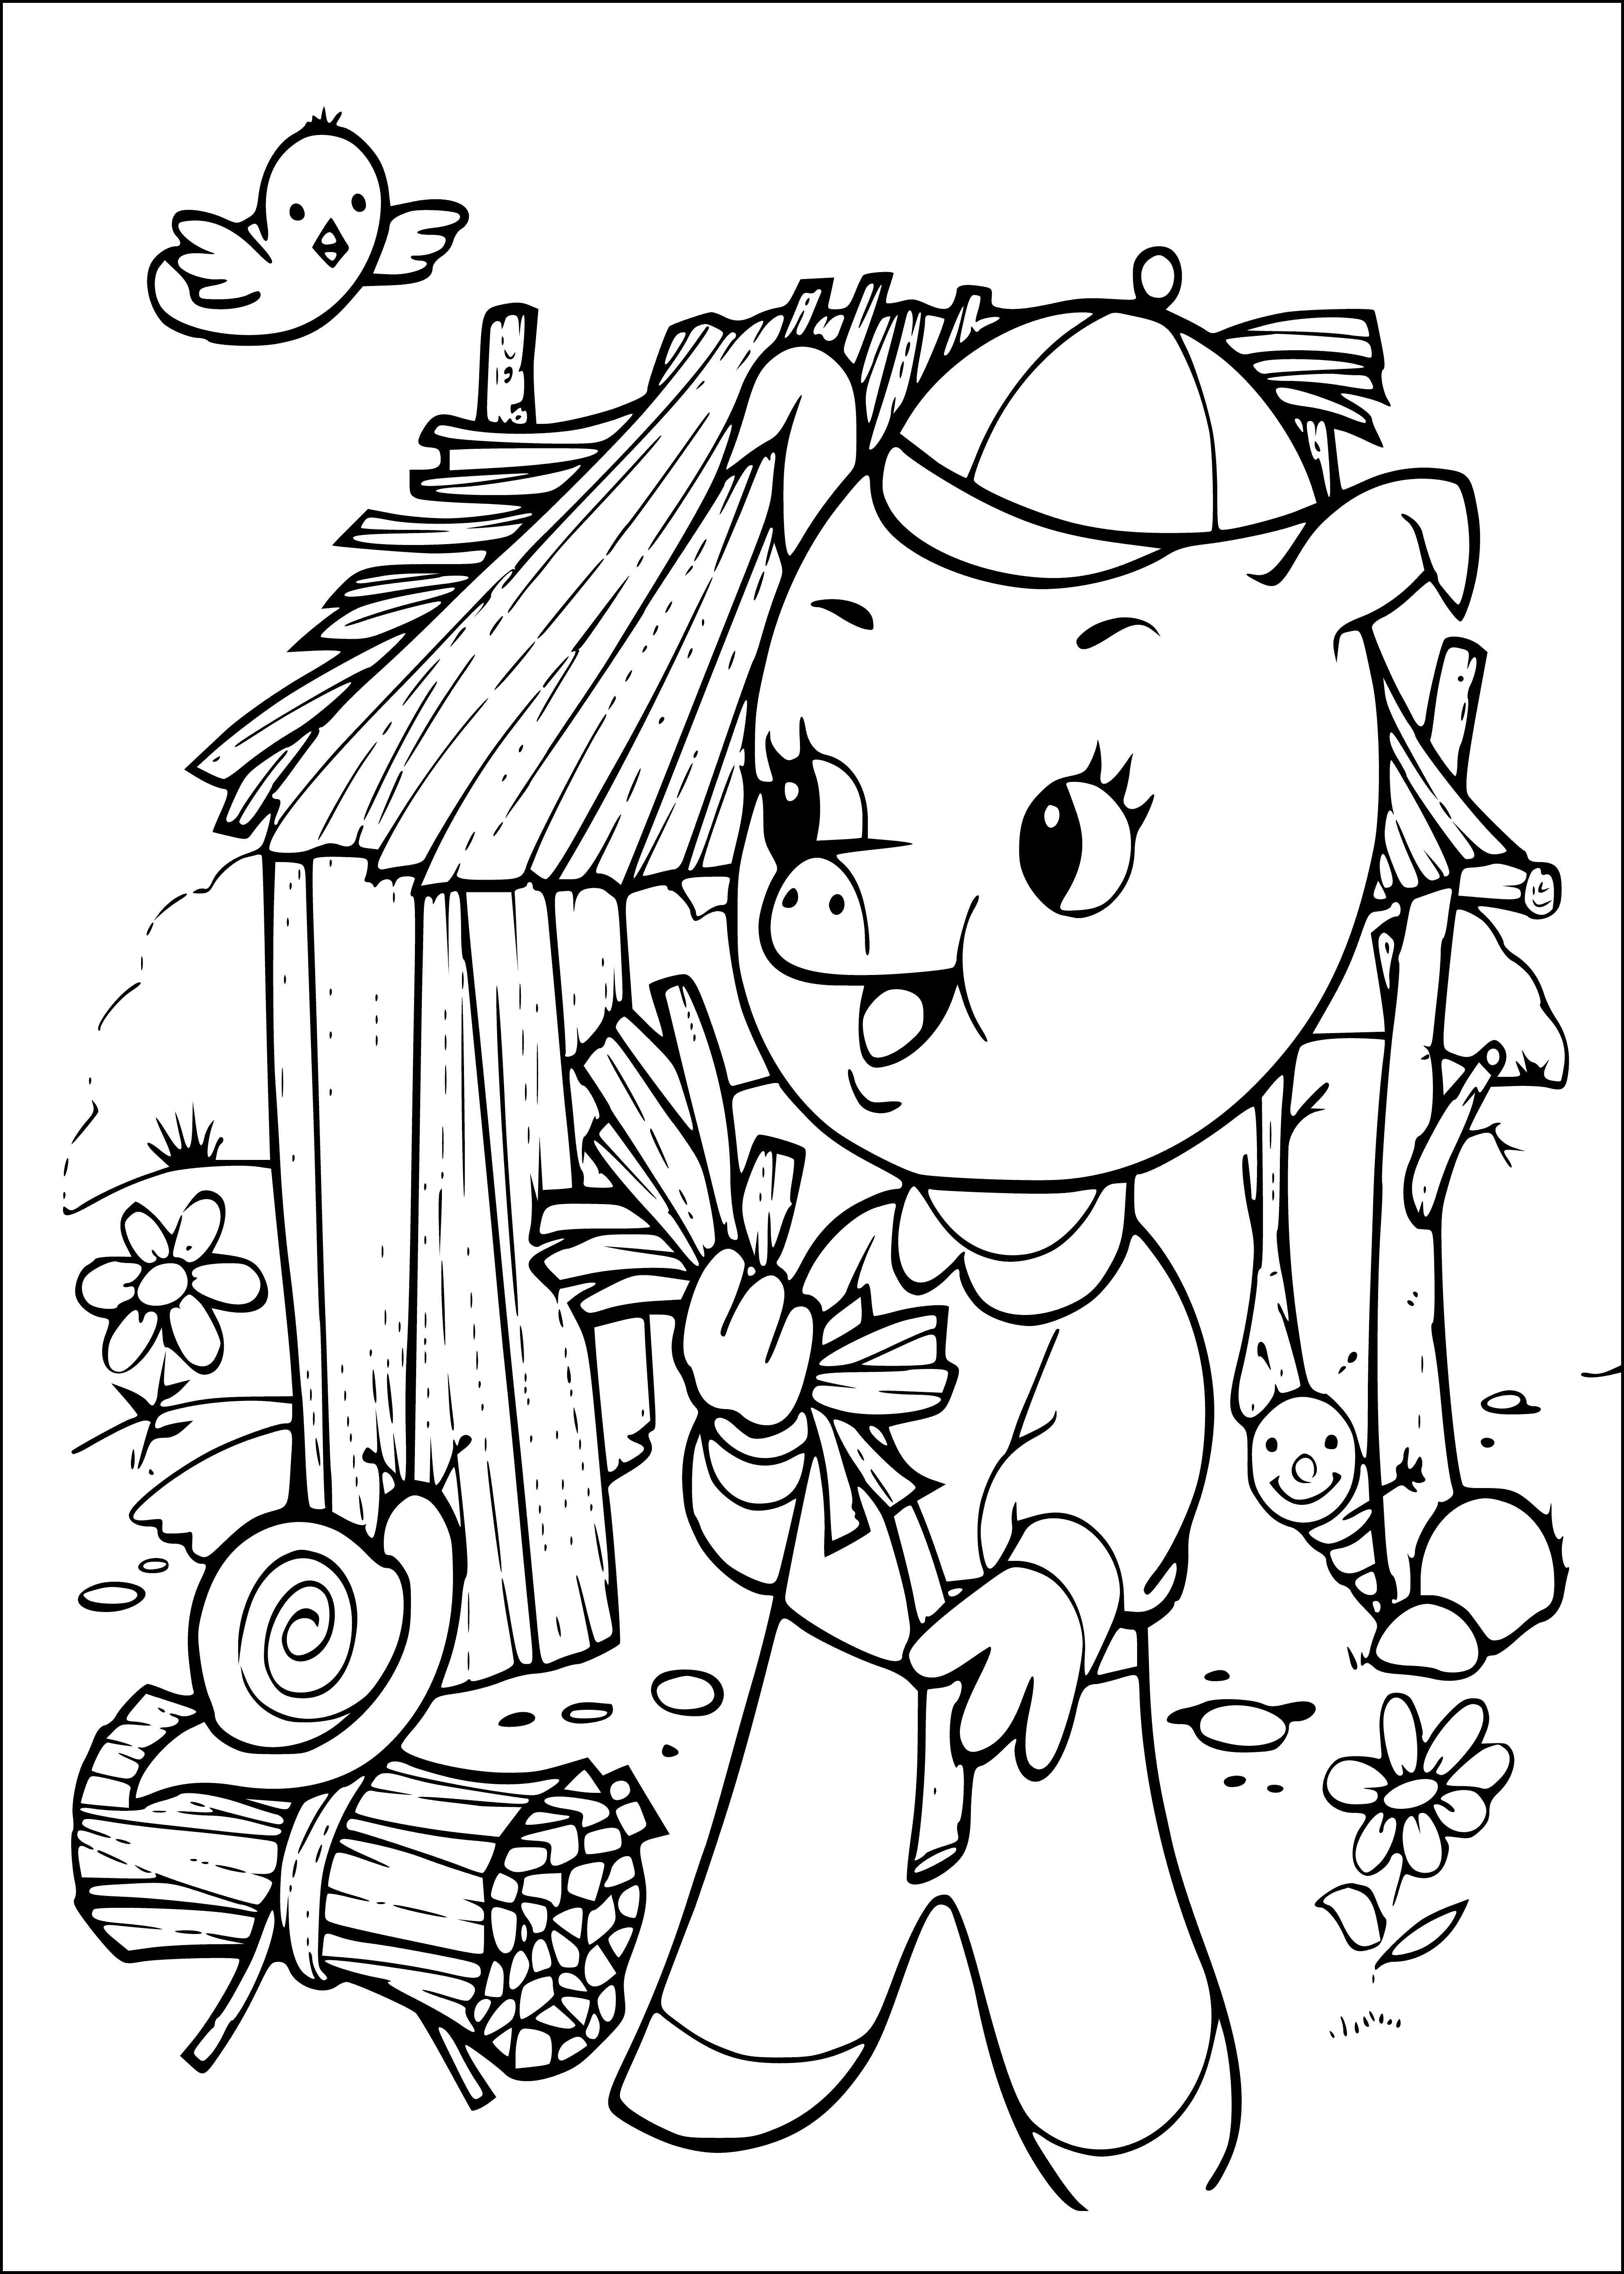 coloring page: 3 pigs stand in front of a house made of branches, with the biggest pig in the middle. A door is in the house center.